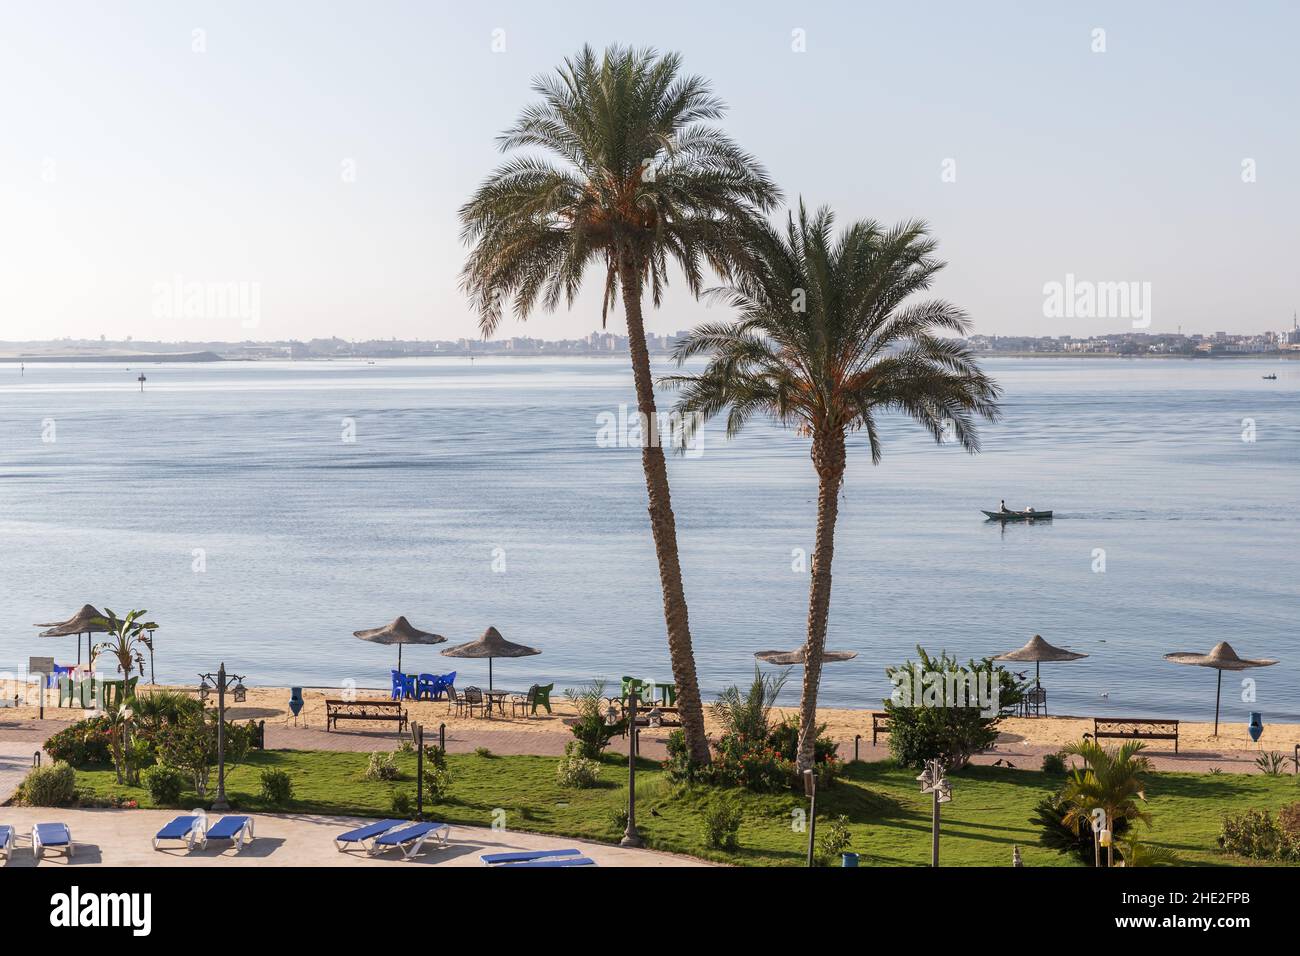 Palm trees grow on the beach at Lake Timsah, one of the Bitter Lakes linked by the Suez Canal. Ismailia, Egypt Stock Photo